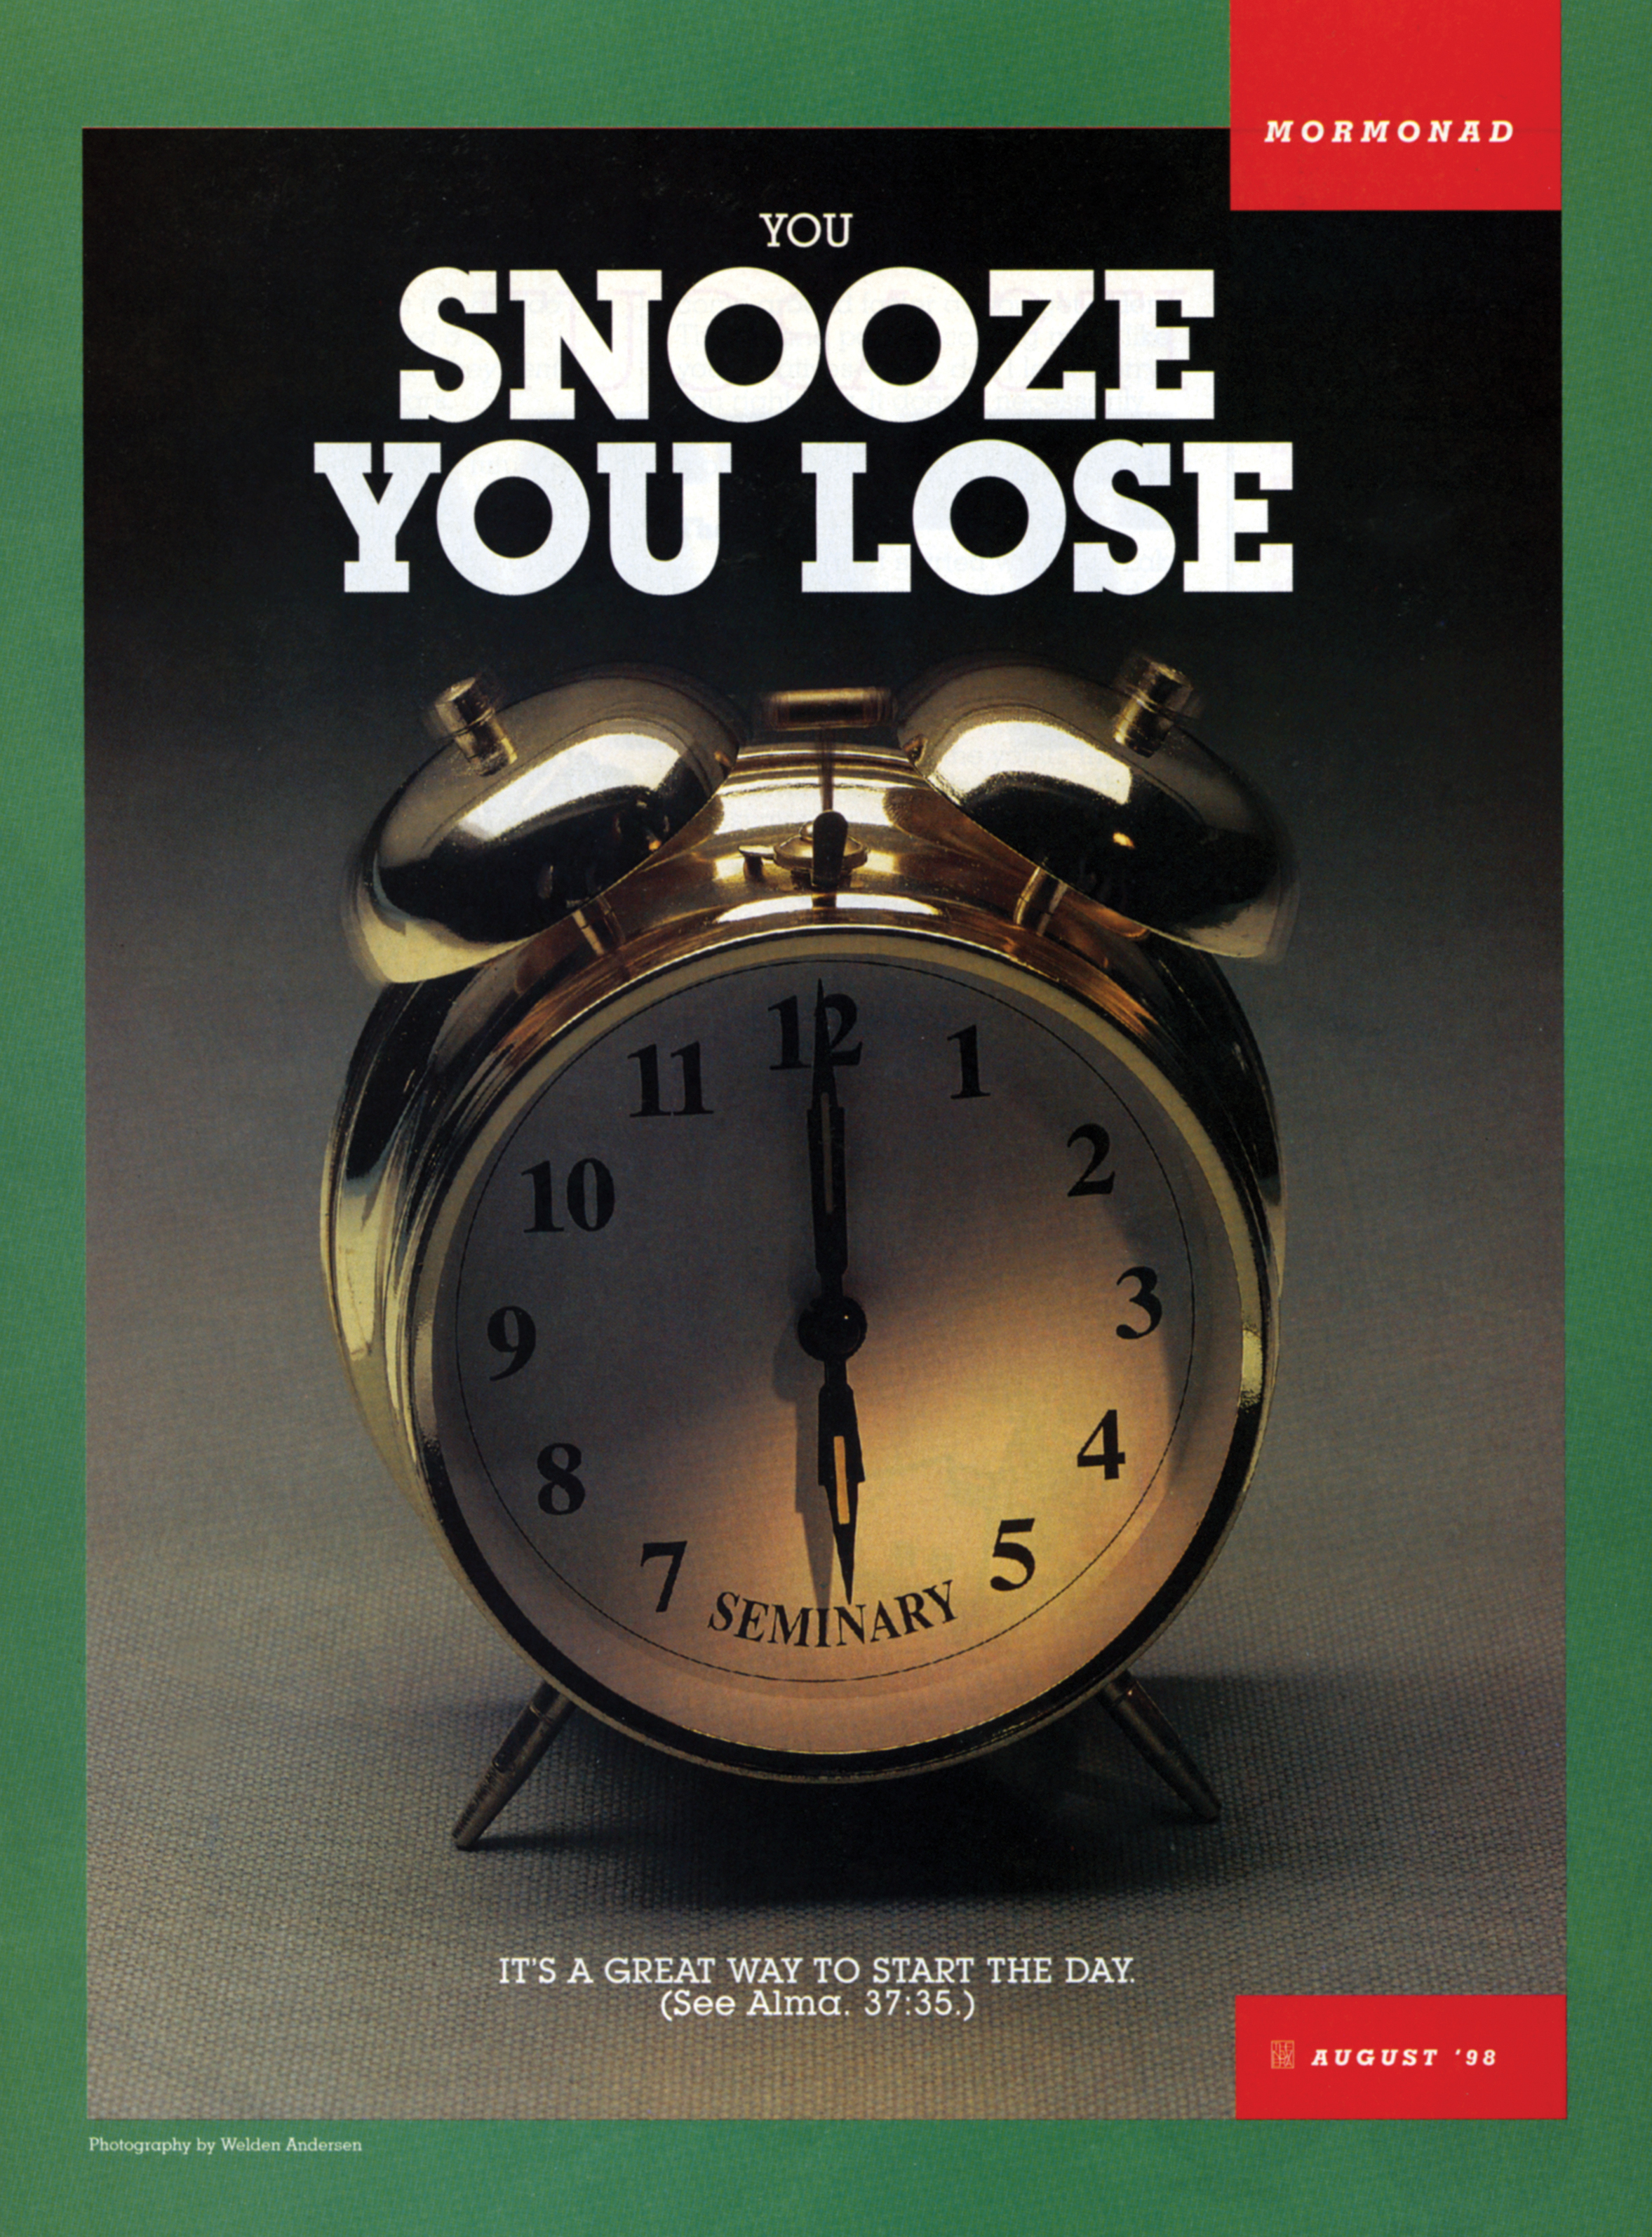 A conceptual photograph of an alarm clock with the word “Seminary” on it, paired with the words “You Snooze, You Lose."